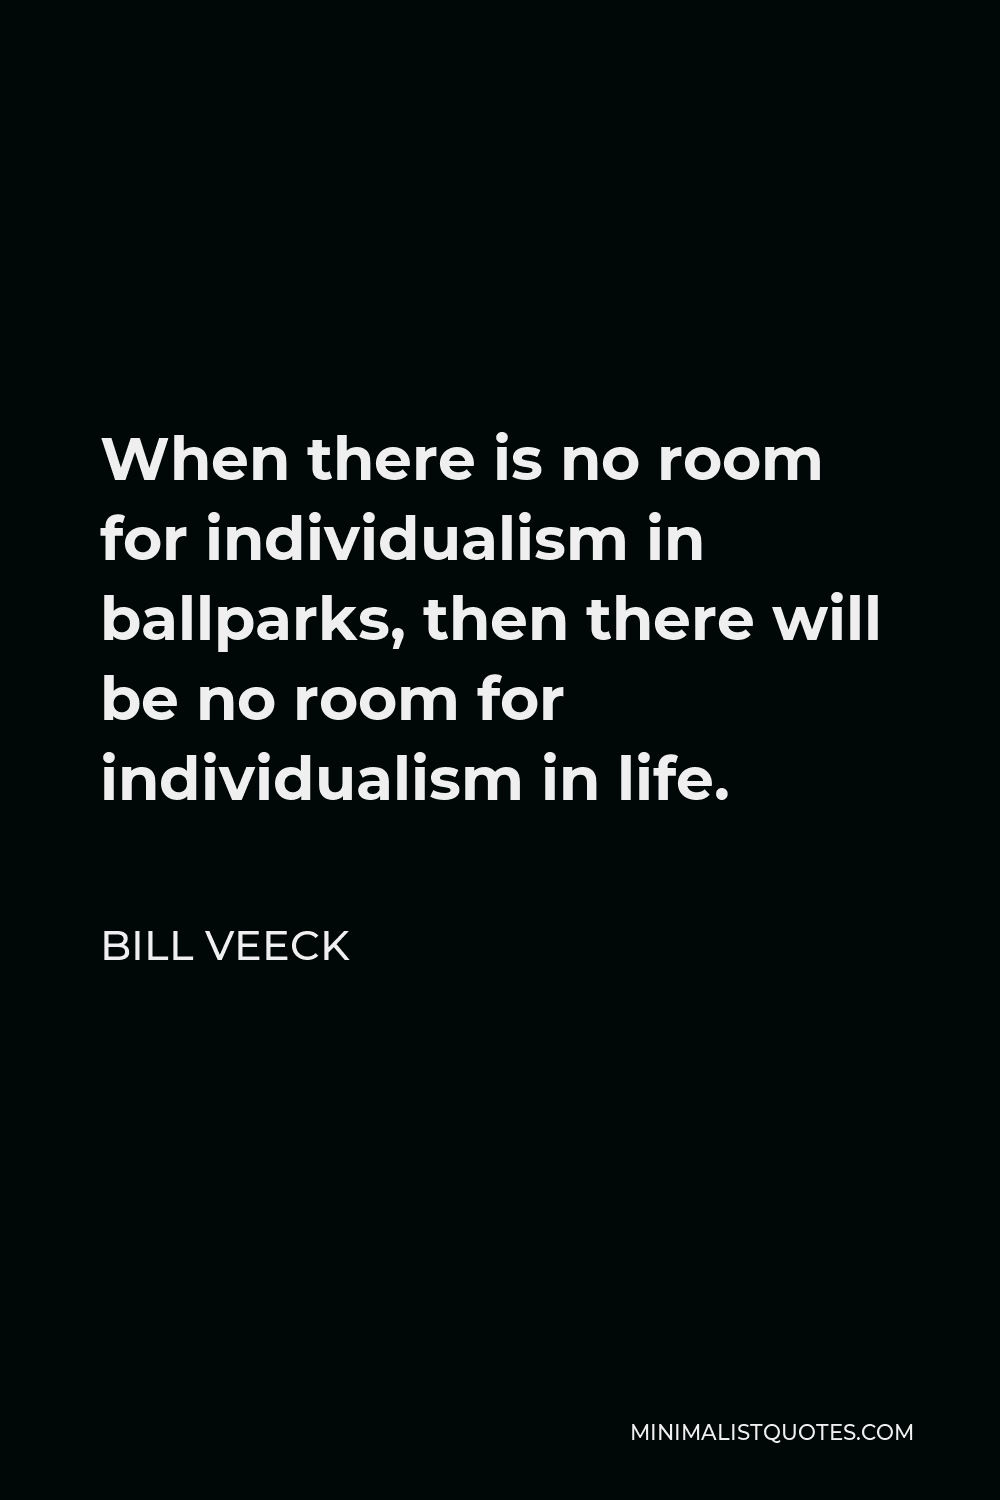 Bill Veeck Quote - When there is no room for individualism in ballparks, then there will be no room for individualism in life.